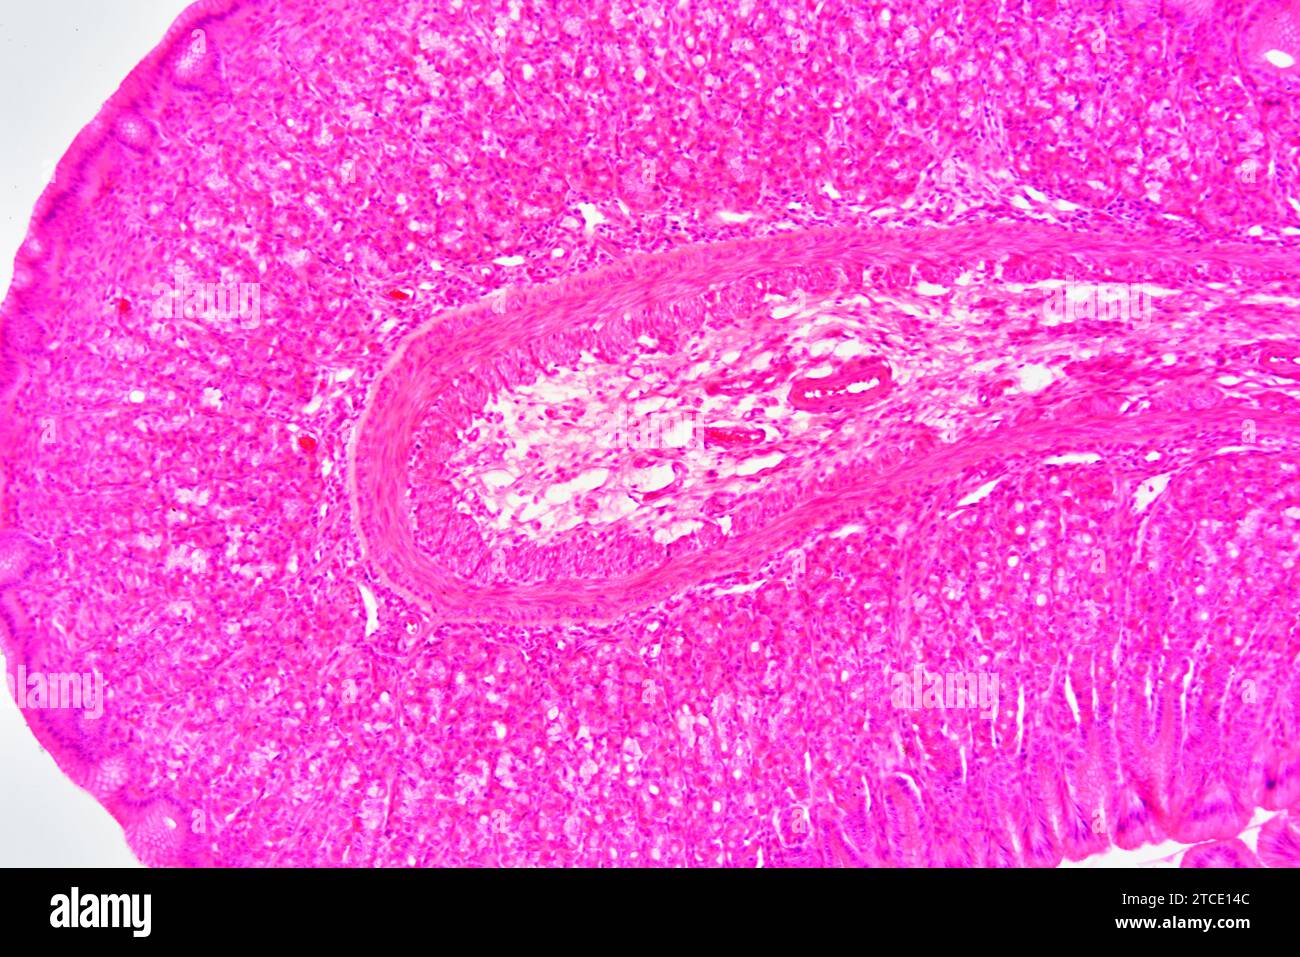 Stomach cross section showing mucosa, submucosa, muscular layer and gastric glands. Optical microscope X100. Stock Photo